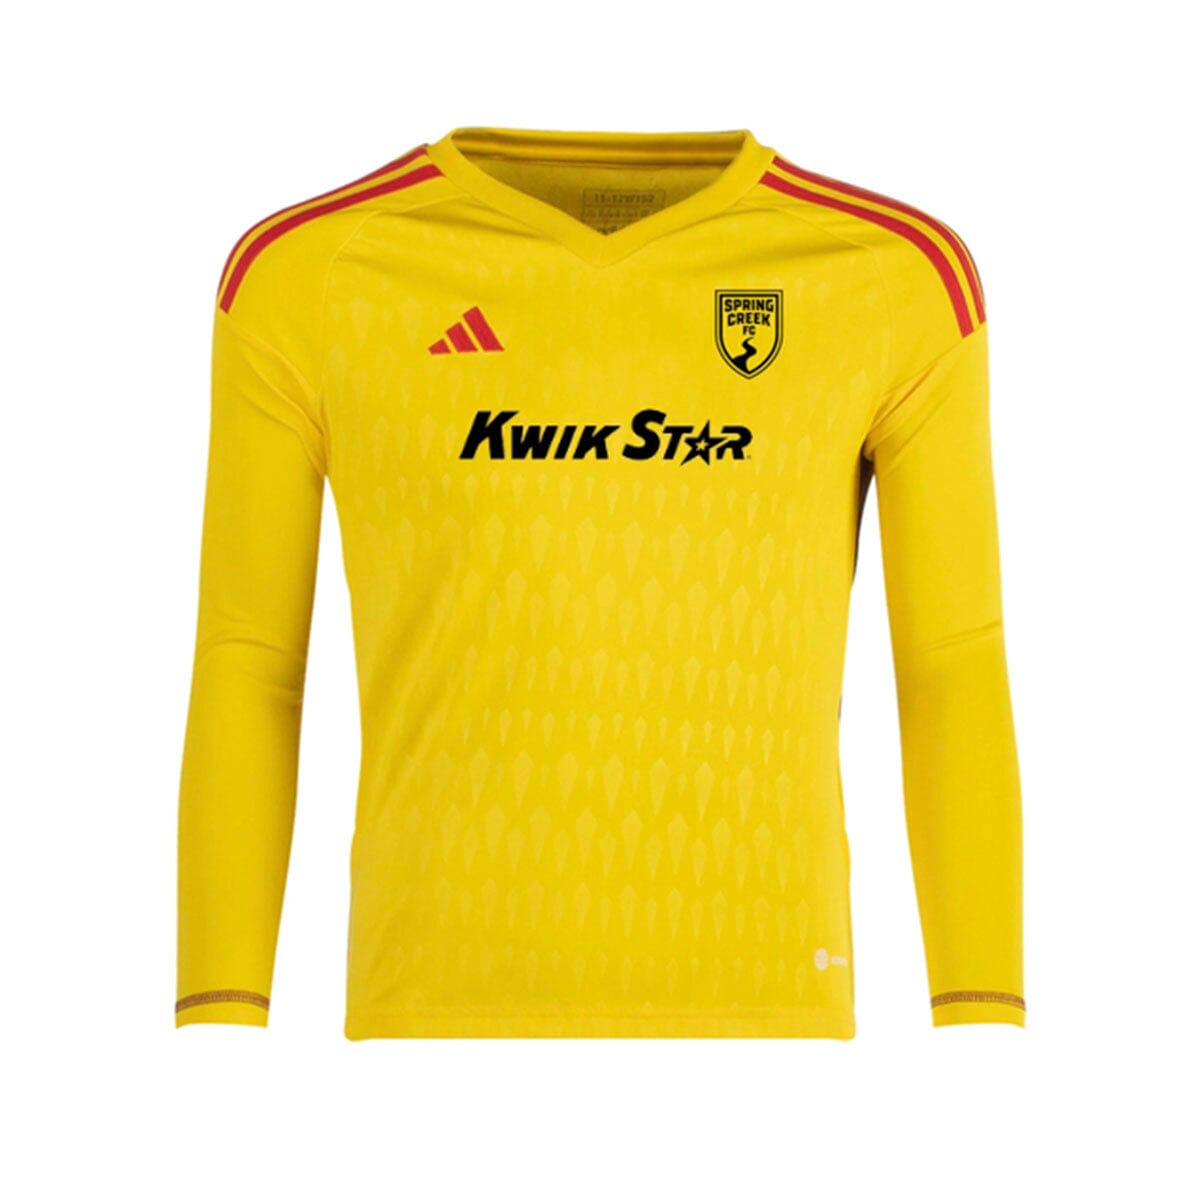 Spring Creek FC '23-'24 Competition Gk Jersey - Team Yellow Jersey Adidas Youth Medium (10-12) Team Yellow 